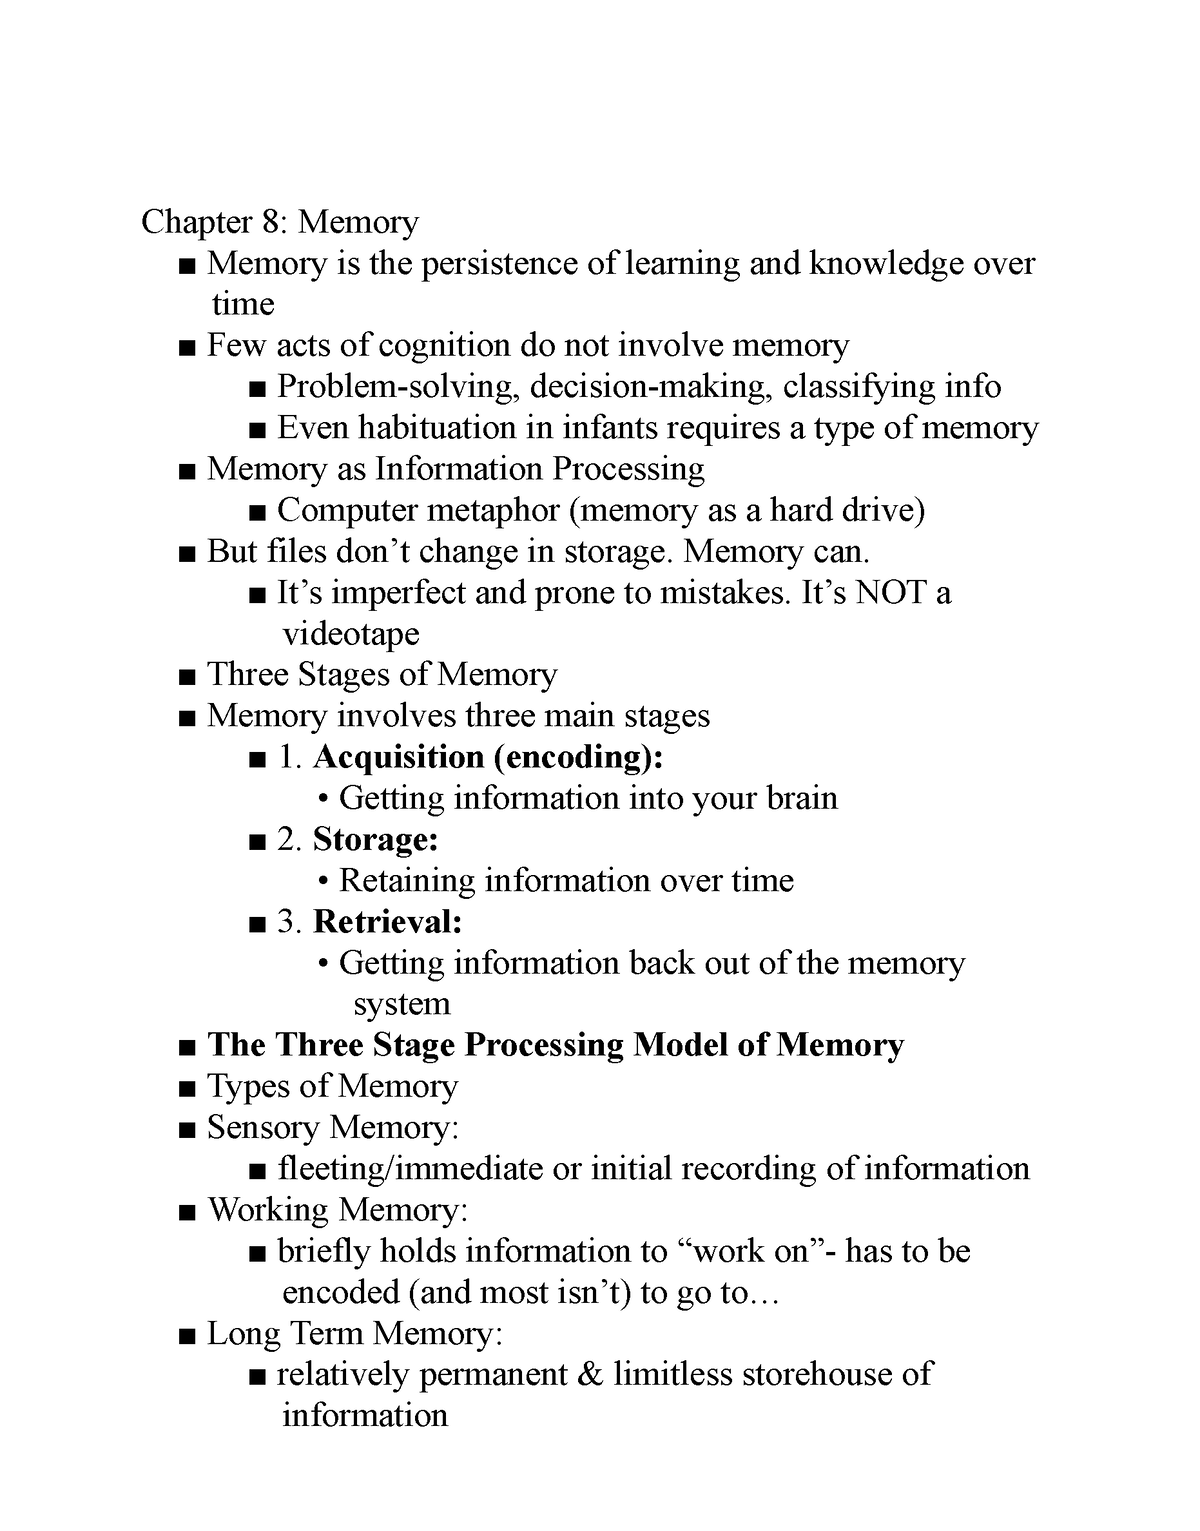 Exam 2 - chapter 9 memory - Chapter 8: Memory Memory is the persistence ...